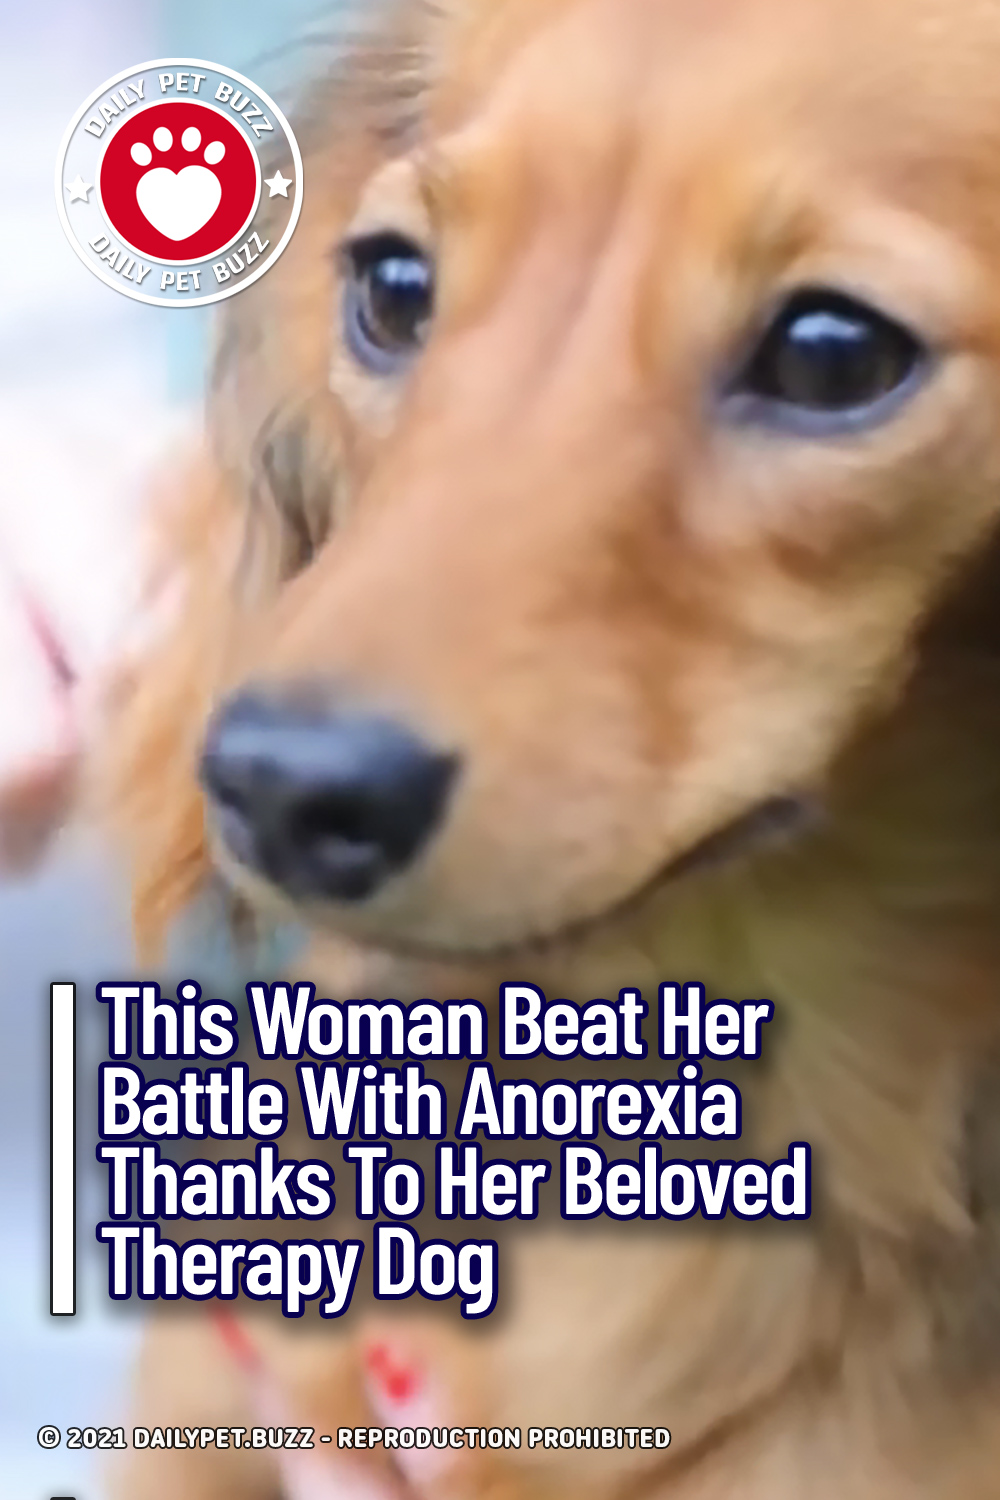 This Woman Beat Her Battle With Anorexia Thanks To Her Beloved Therapy Dog